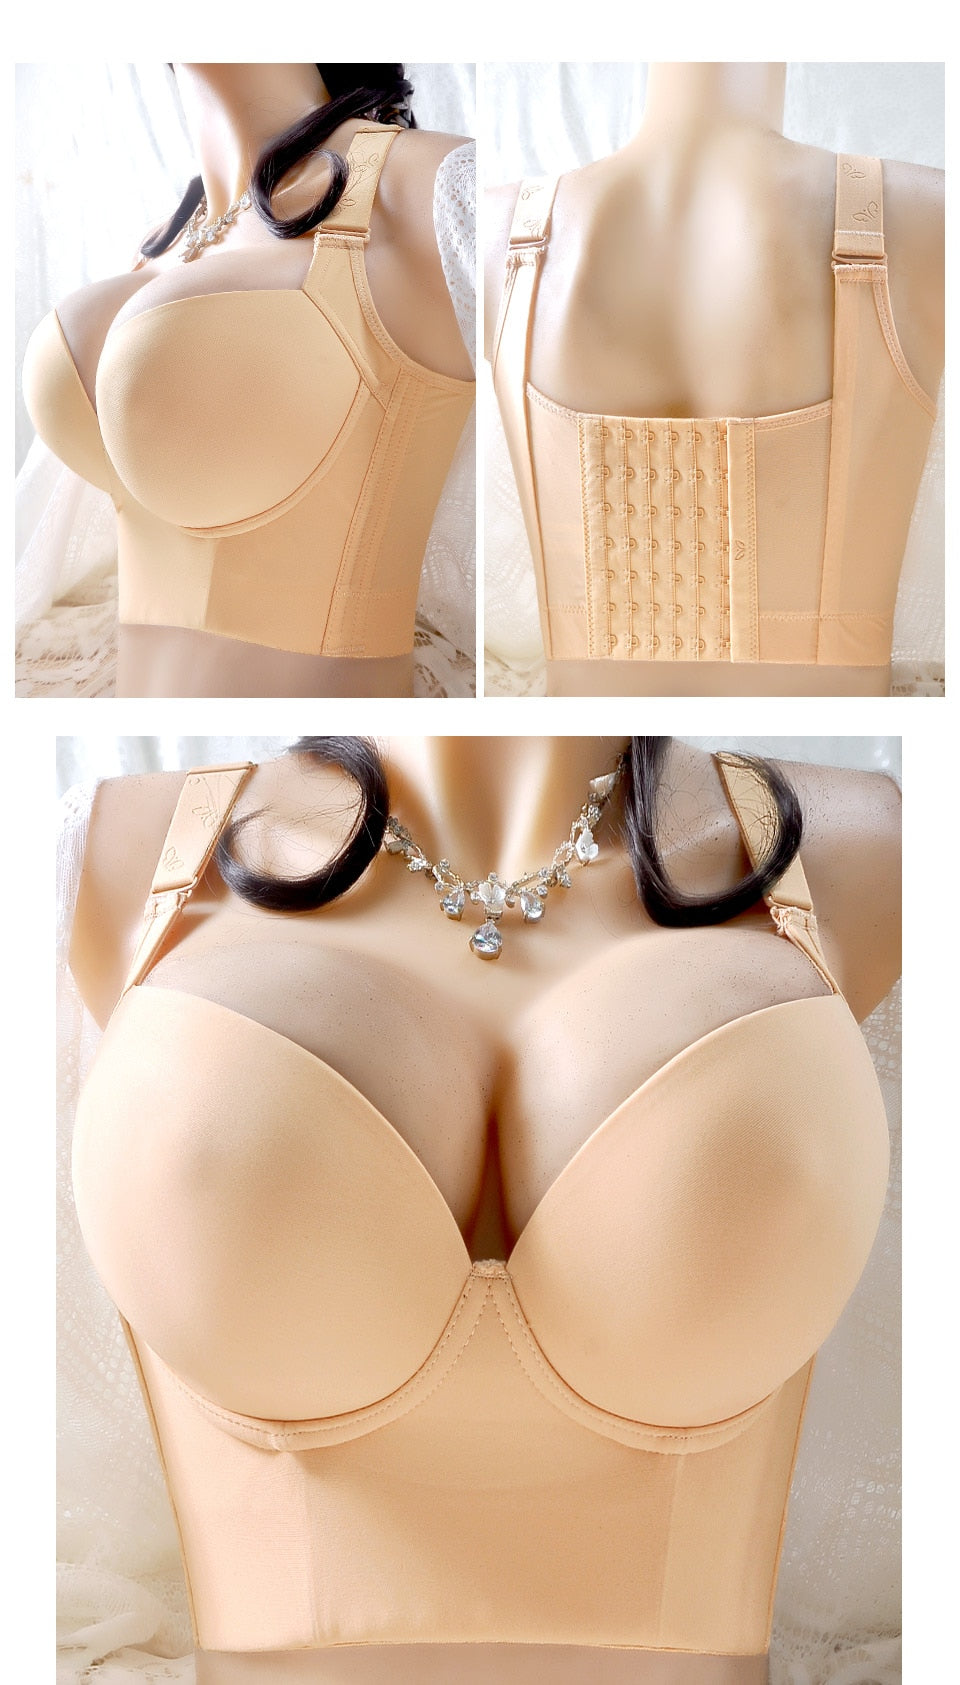 Hide Back Fat With Anti-sagging Deep Cup Push Up Shaper Bra